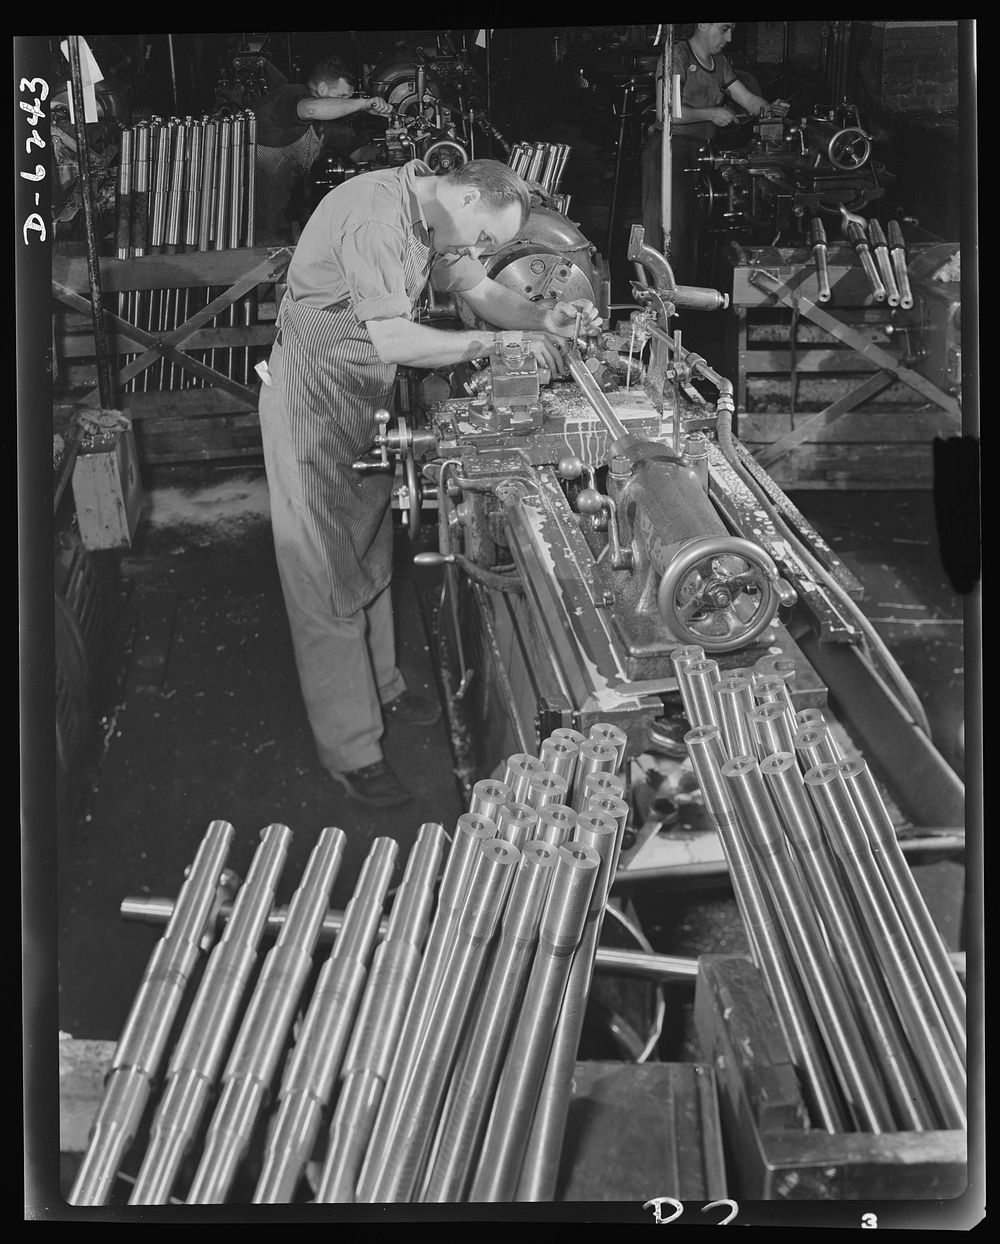 Production. Machine guns of various calibers. Walter Newman, operator of a high-speed lathe in a large firearms plant…